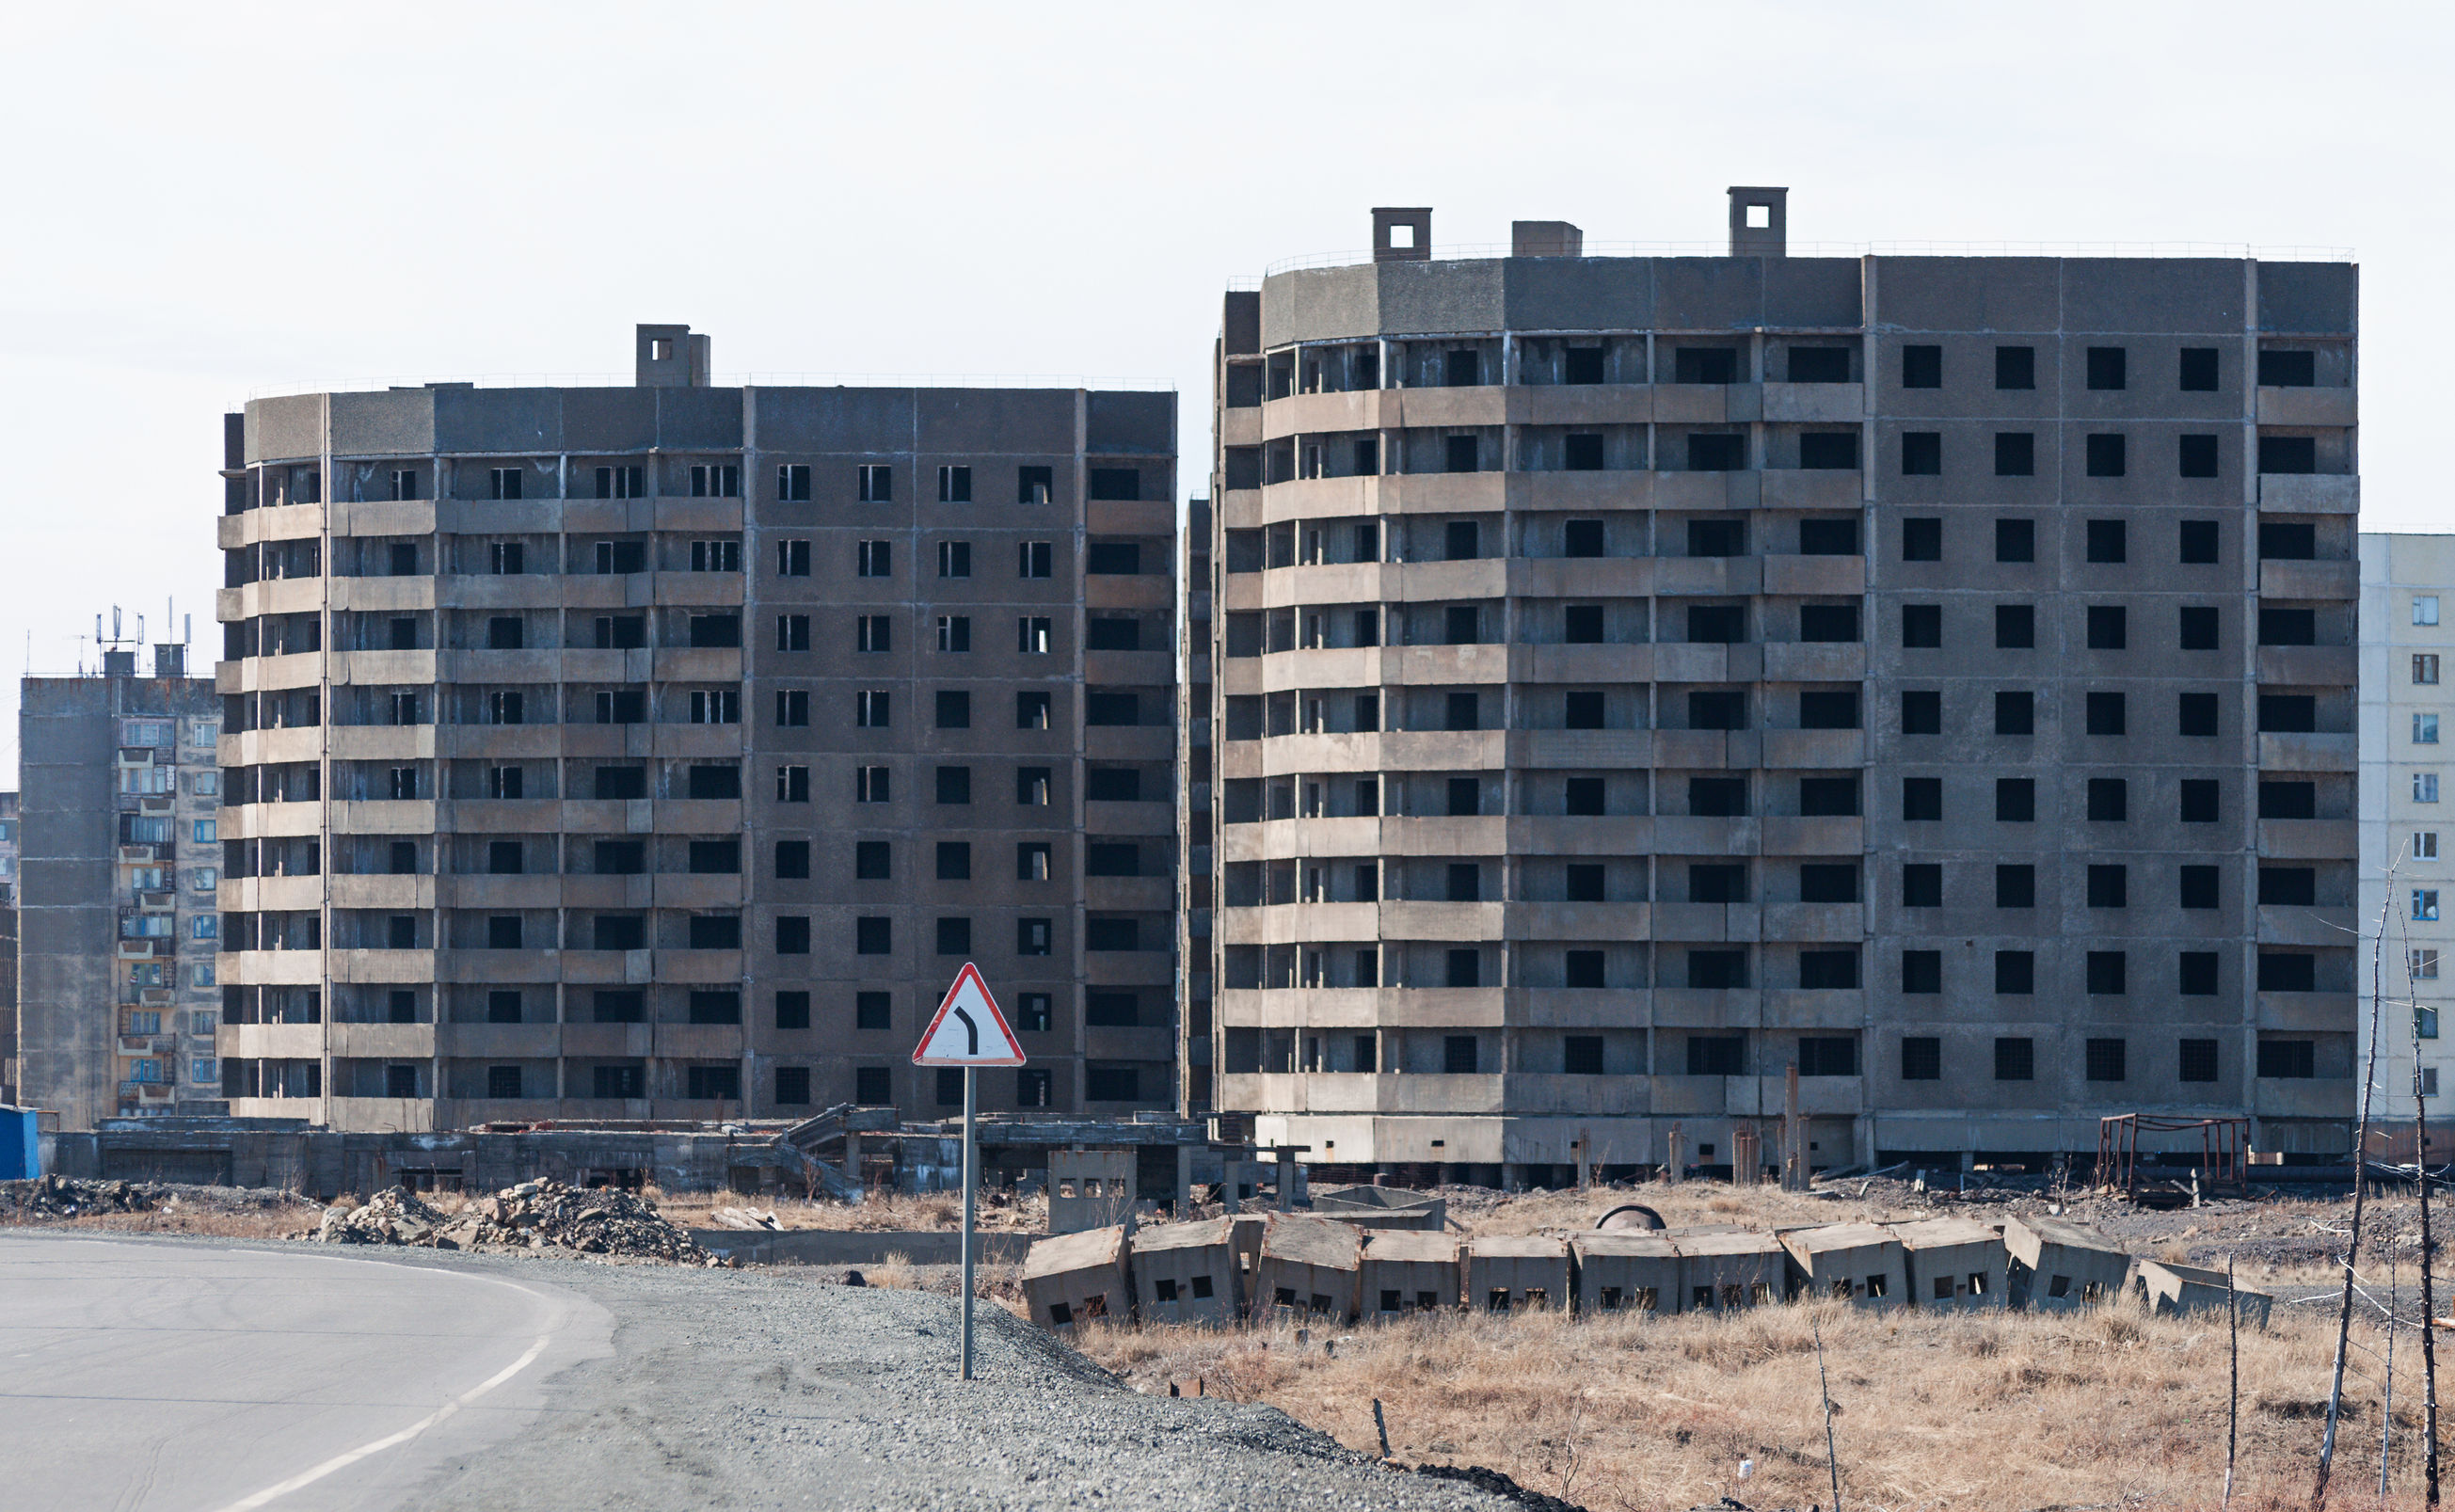 61353510 - derelict high-rise building in norilsk. house on pile foundation, built on permafrost.